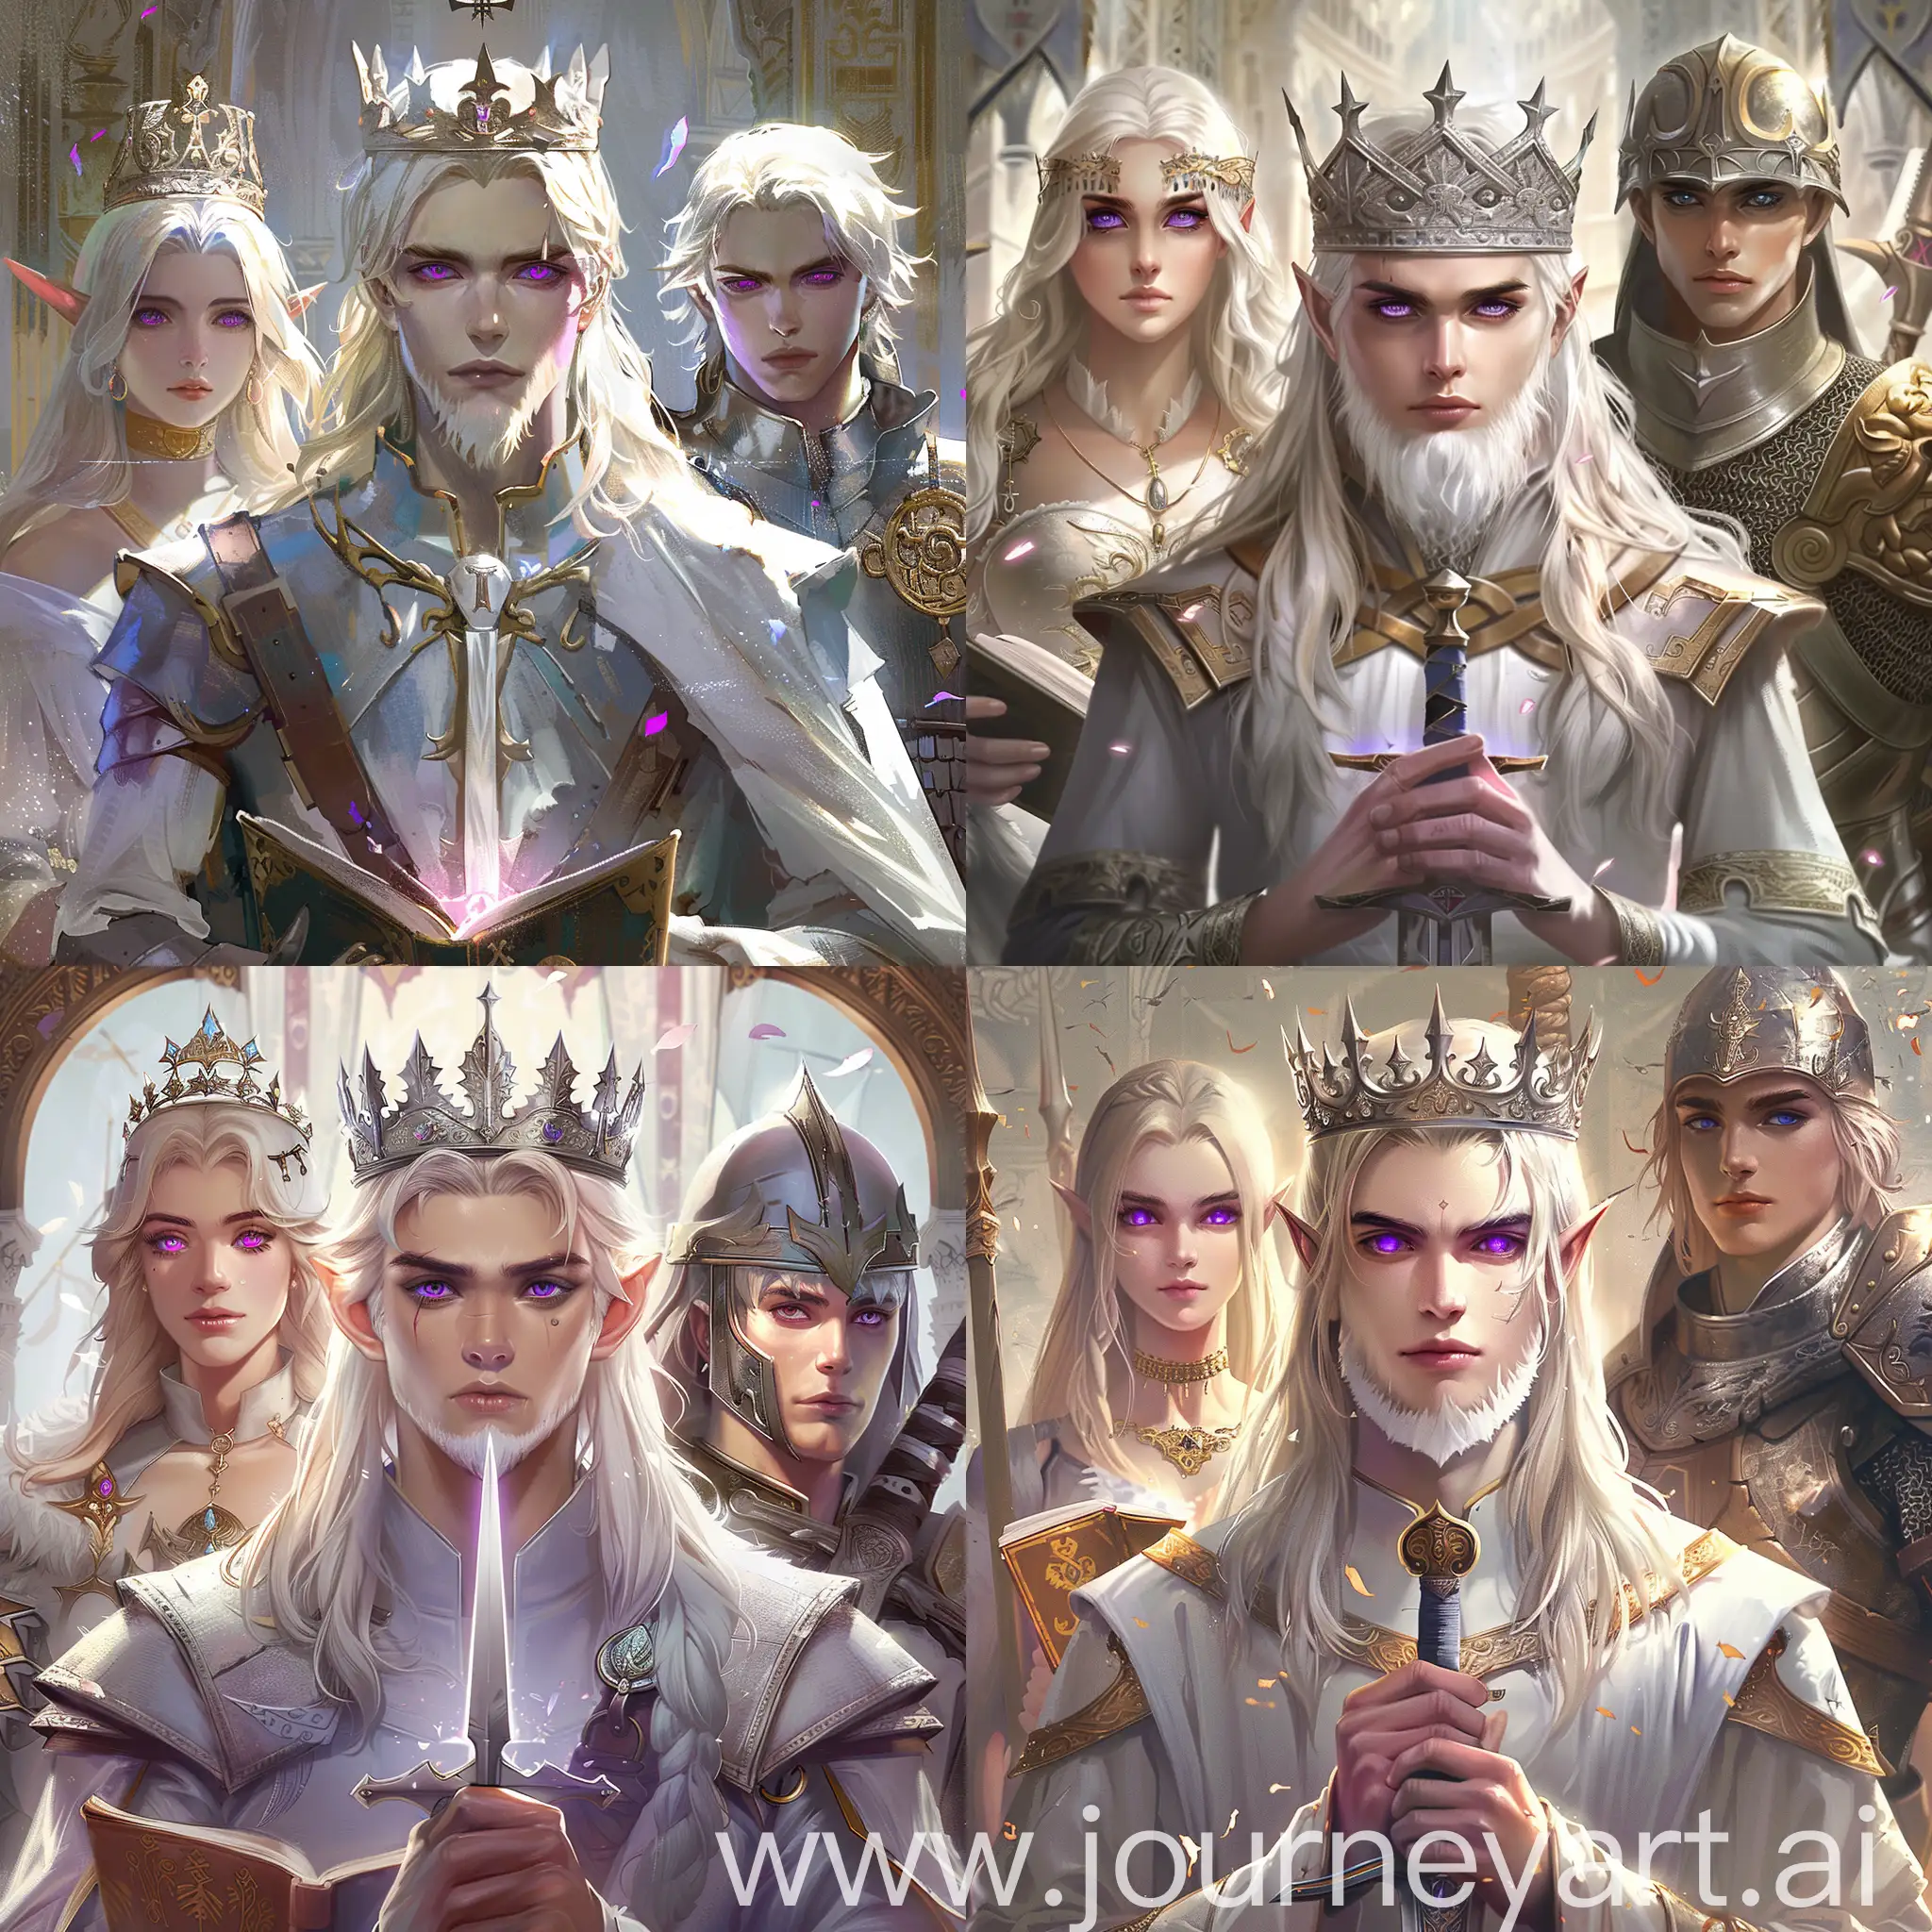 In the center stands a young man, he has a white contoured beard, he wears a silver crown, he has long snow-white hair, purple eyes, in his hands he holds a sword with the blade down. To the left of the man in the crown is a beautiful girl, she is in an elegant white outfit, she has long golden hair, violet eyes, she looks to the left and holds a book in her hands. To the right of the man in the crown is a warrior, he is completely in armor, he does not have a helmet on his head, he has snow-white hair of medium length, blue eyes, he looks to the right, he holds a shield and a spear in his hands. All this is not in the anime style, but in the style of the game Crusader kings 3. All this is in the style of the game Crusader kings 3.